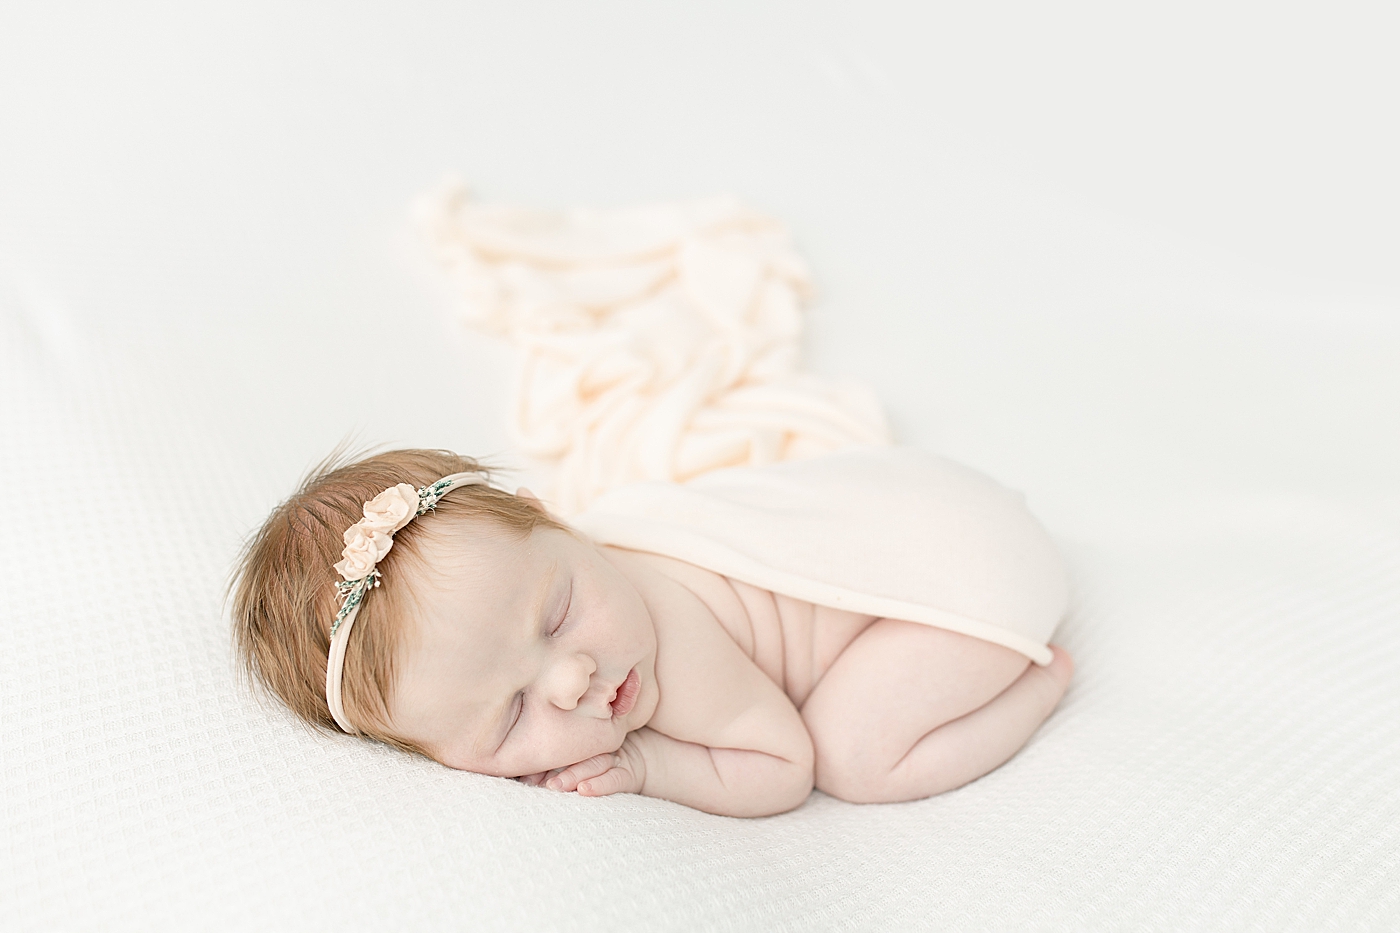 Sleeping newborn in peachy pink swaddle | Photo by Little Sunshine Photography